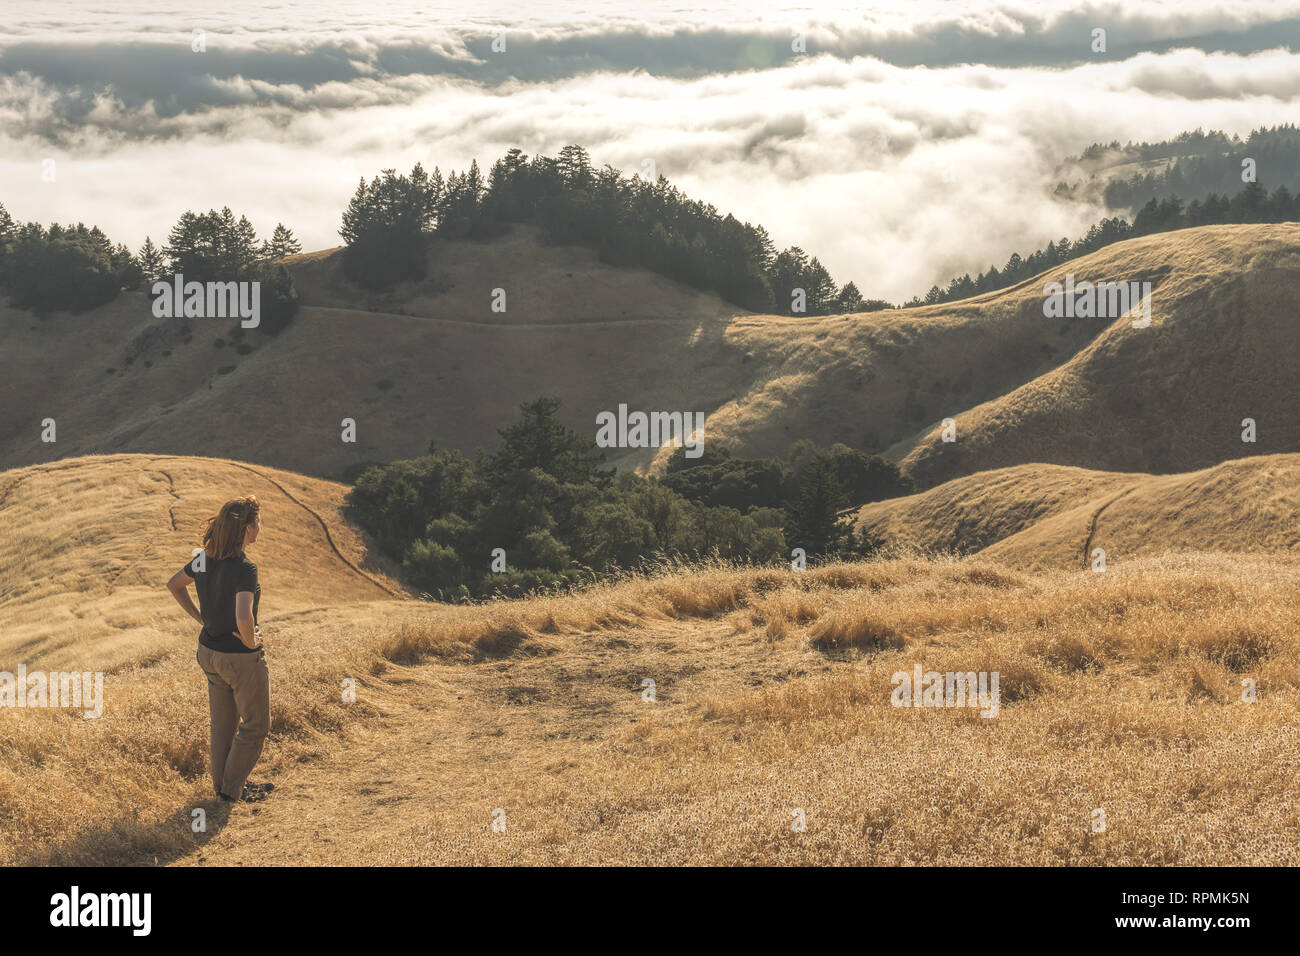 A woman looks out over the rolling hills of Mount Tamalpais, CA Stock Photo